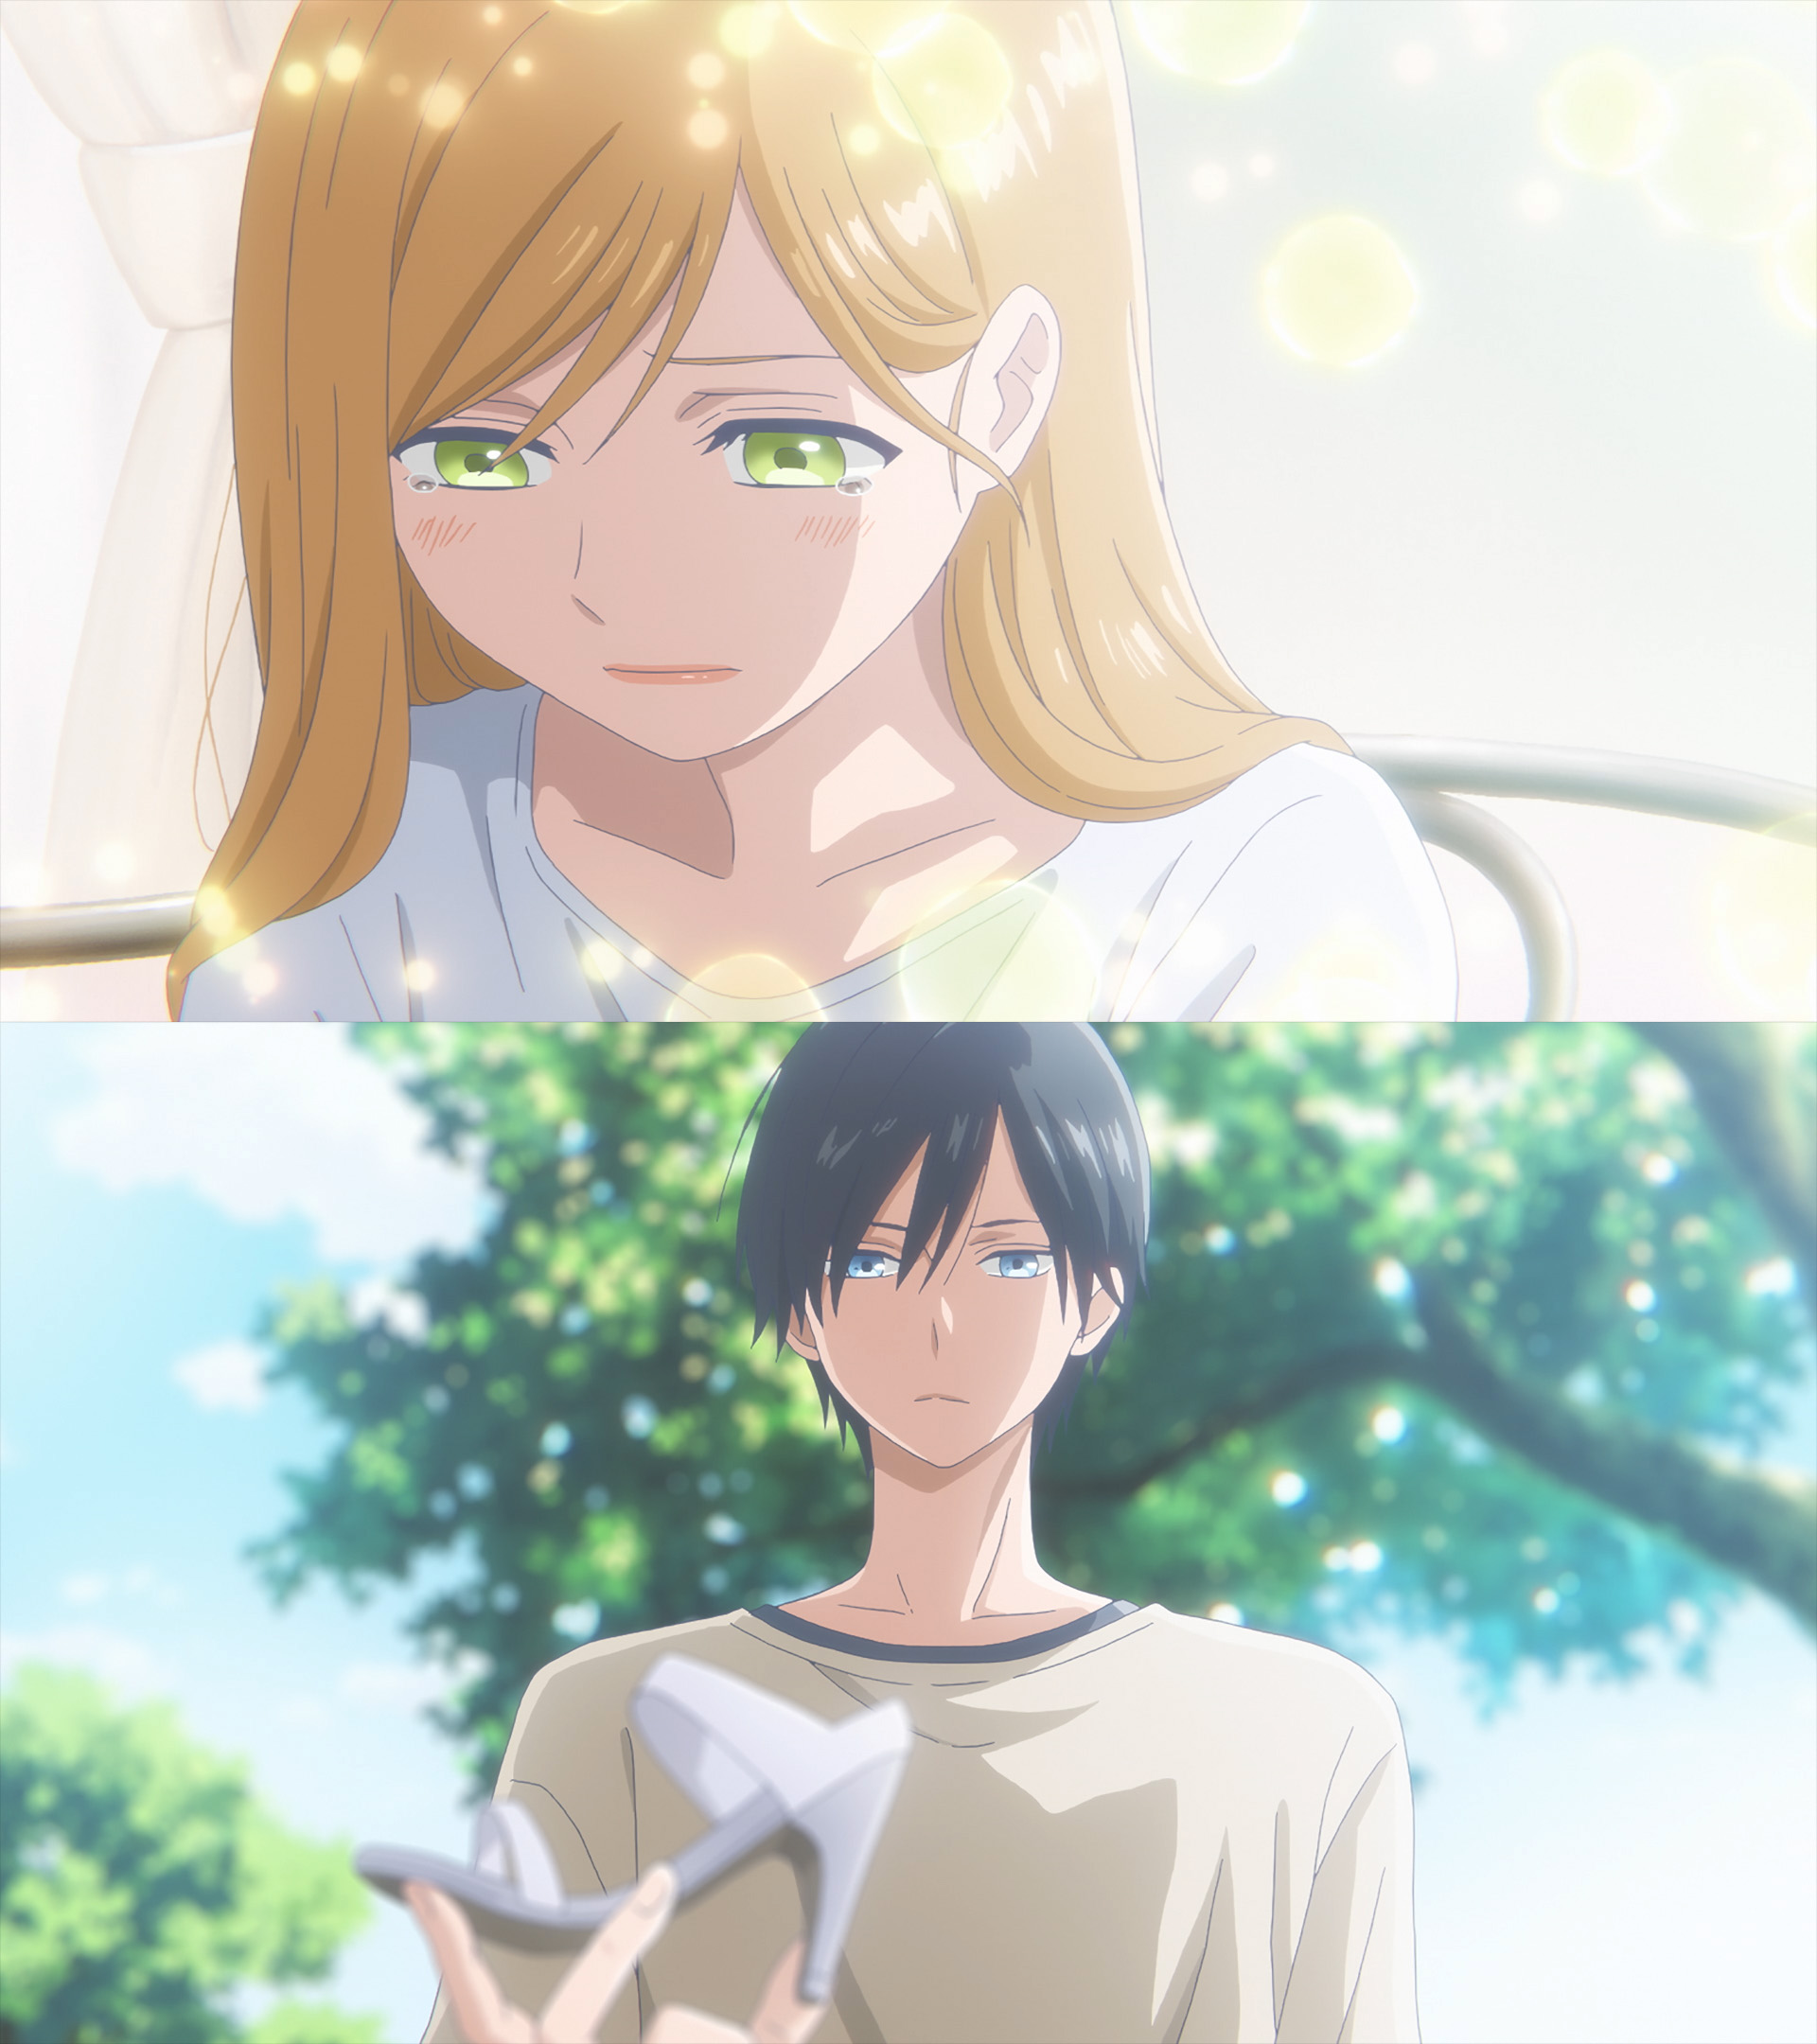 My Love Story with Yamada-kun at Lv999 announces the English dub cast for  the anime